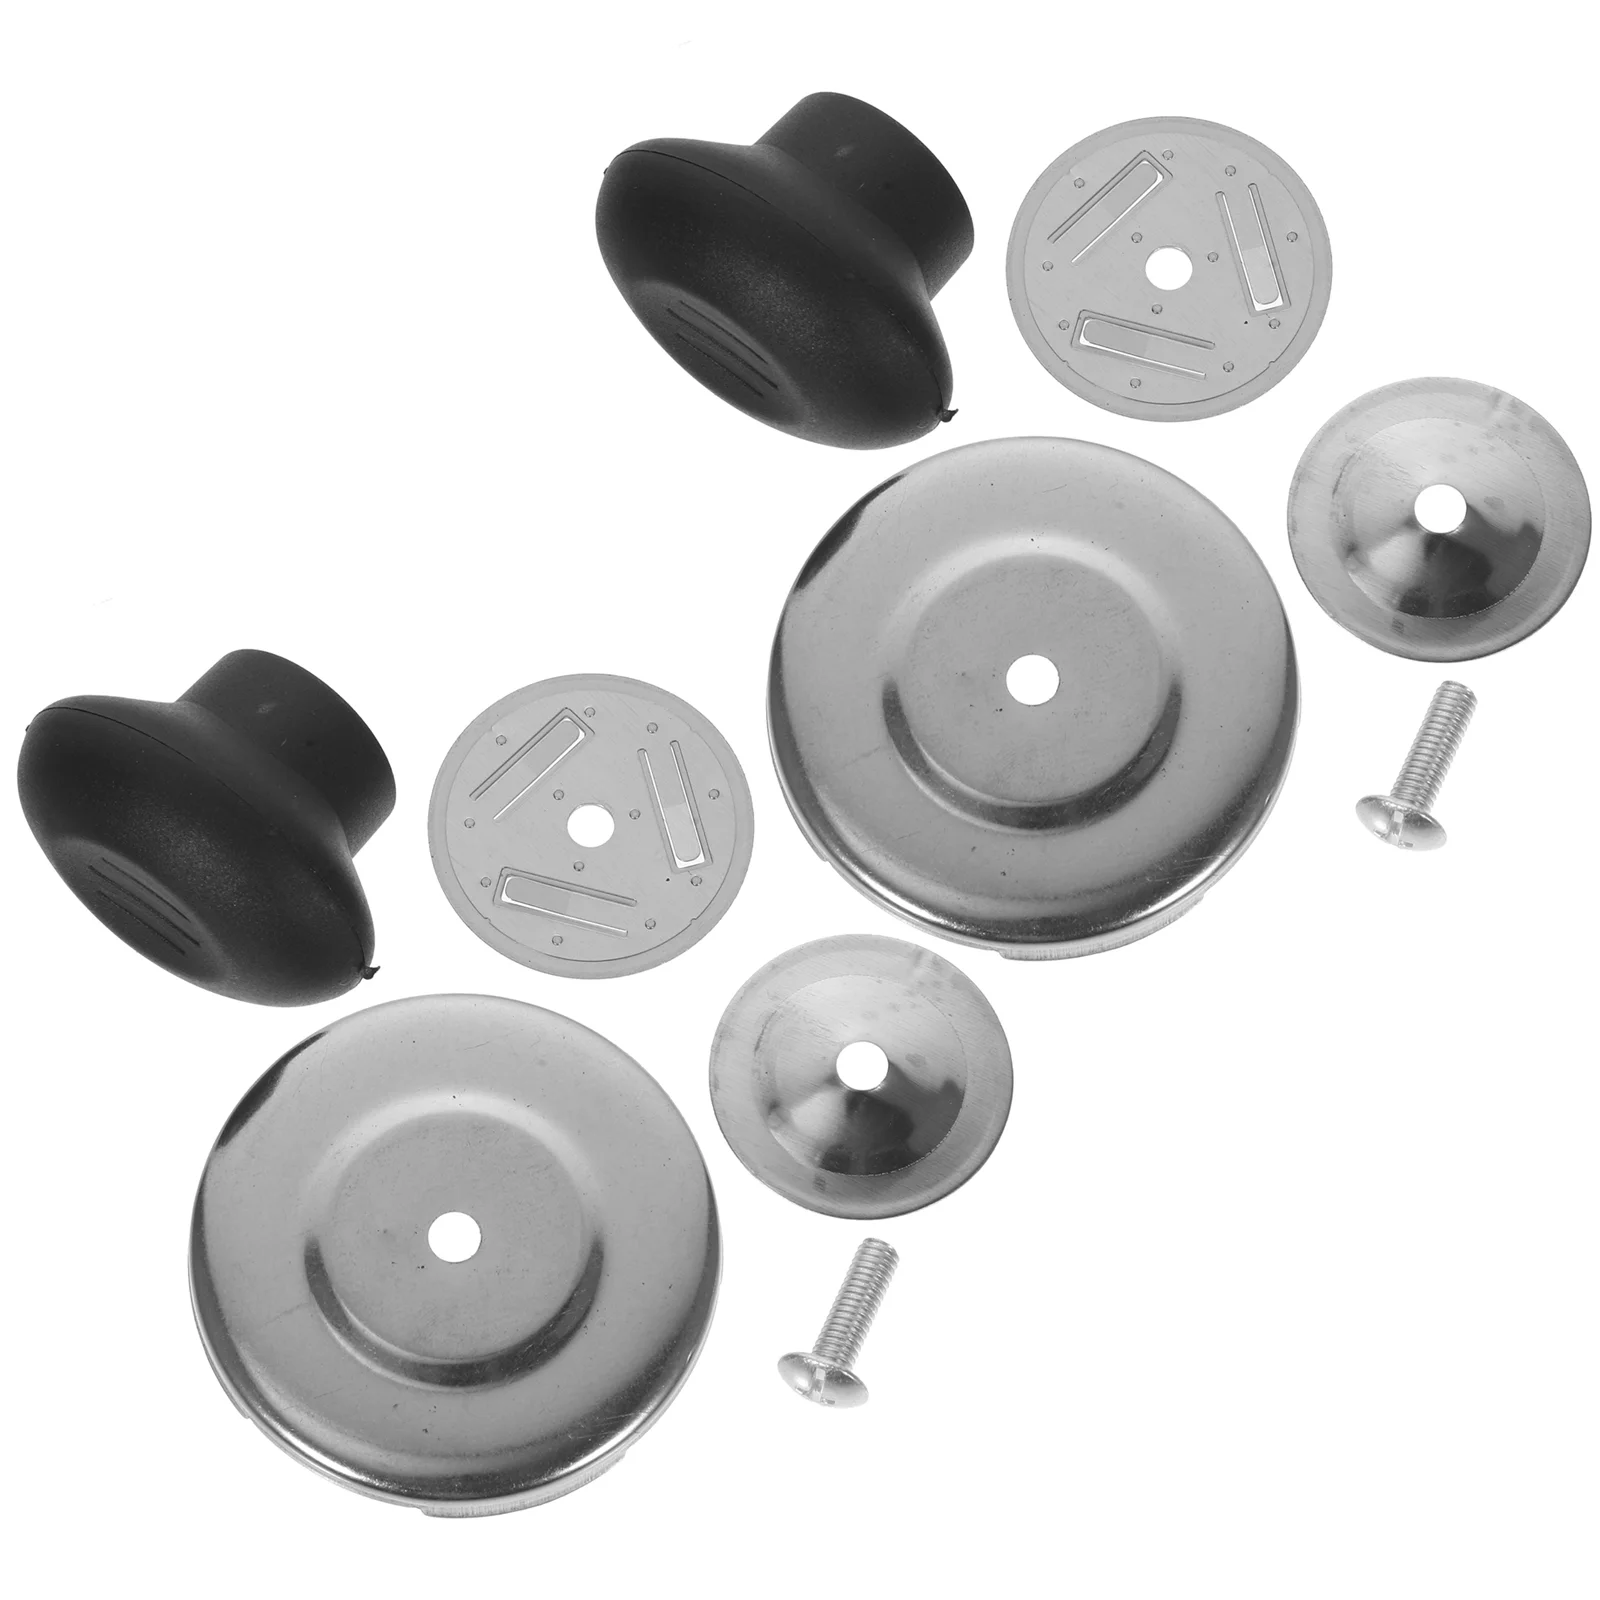 

2 Pcs Kettle Water Lid Handles Knobs Teapot Flute Replacement Simple Home Whistle Pp Metal Pan Fittings